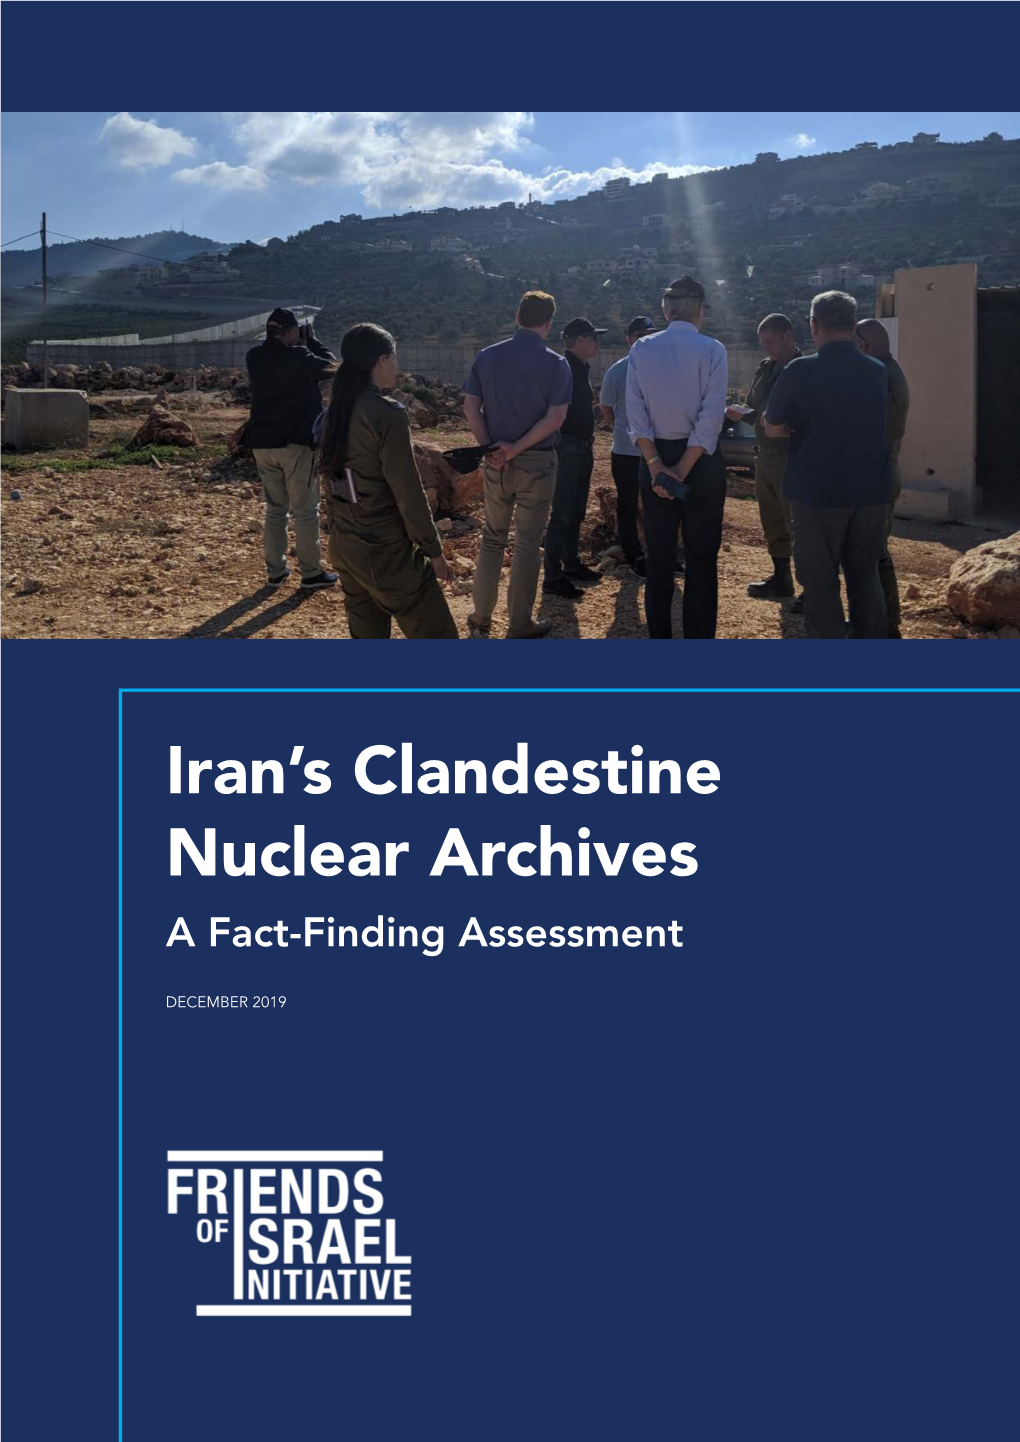 Iran's Clandestine Nuclear Archives